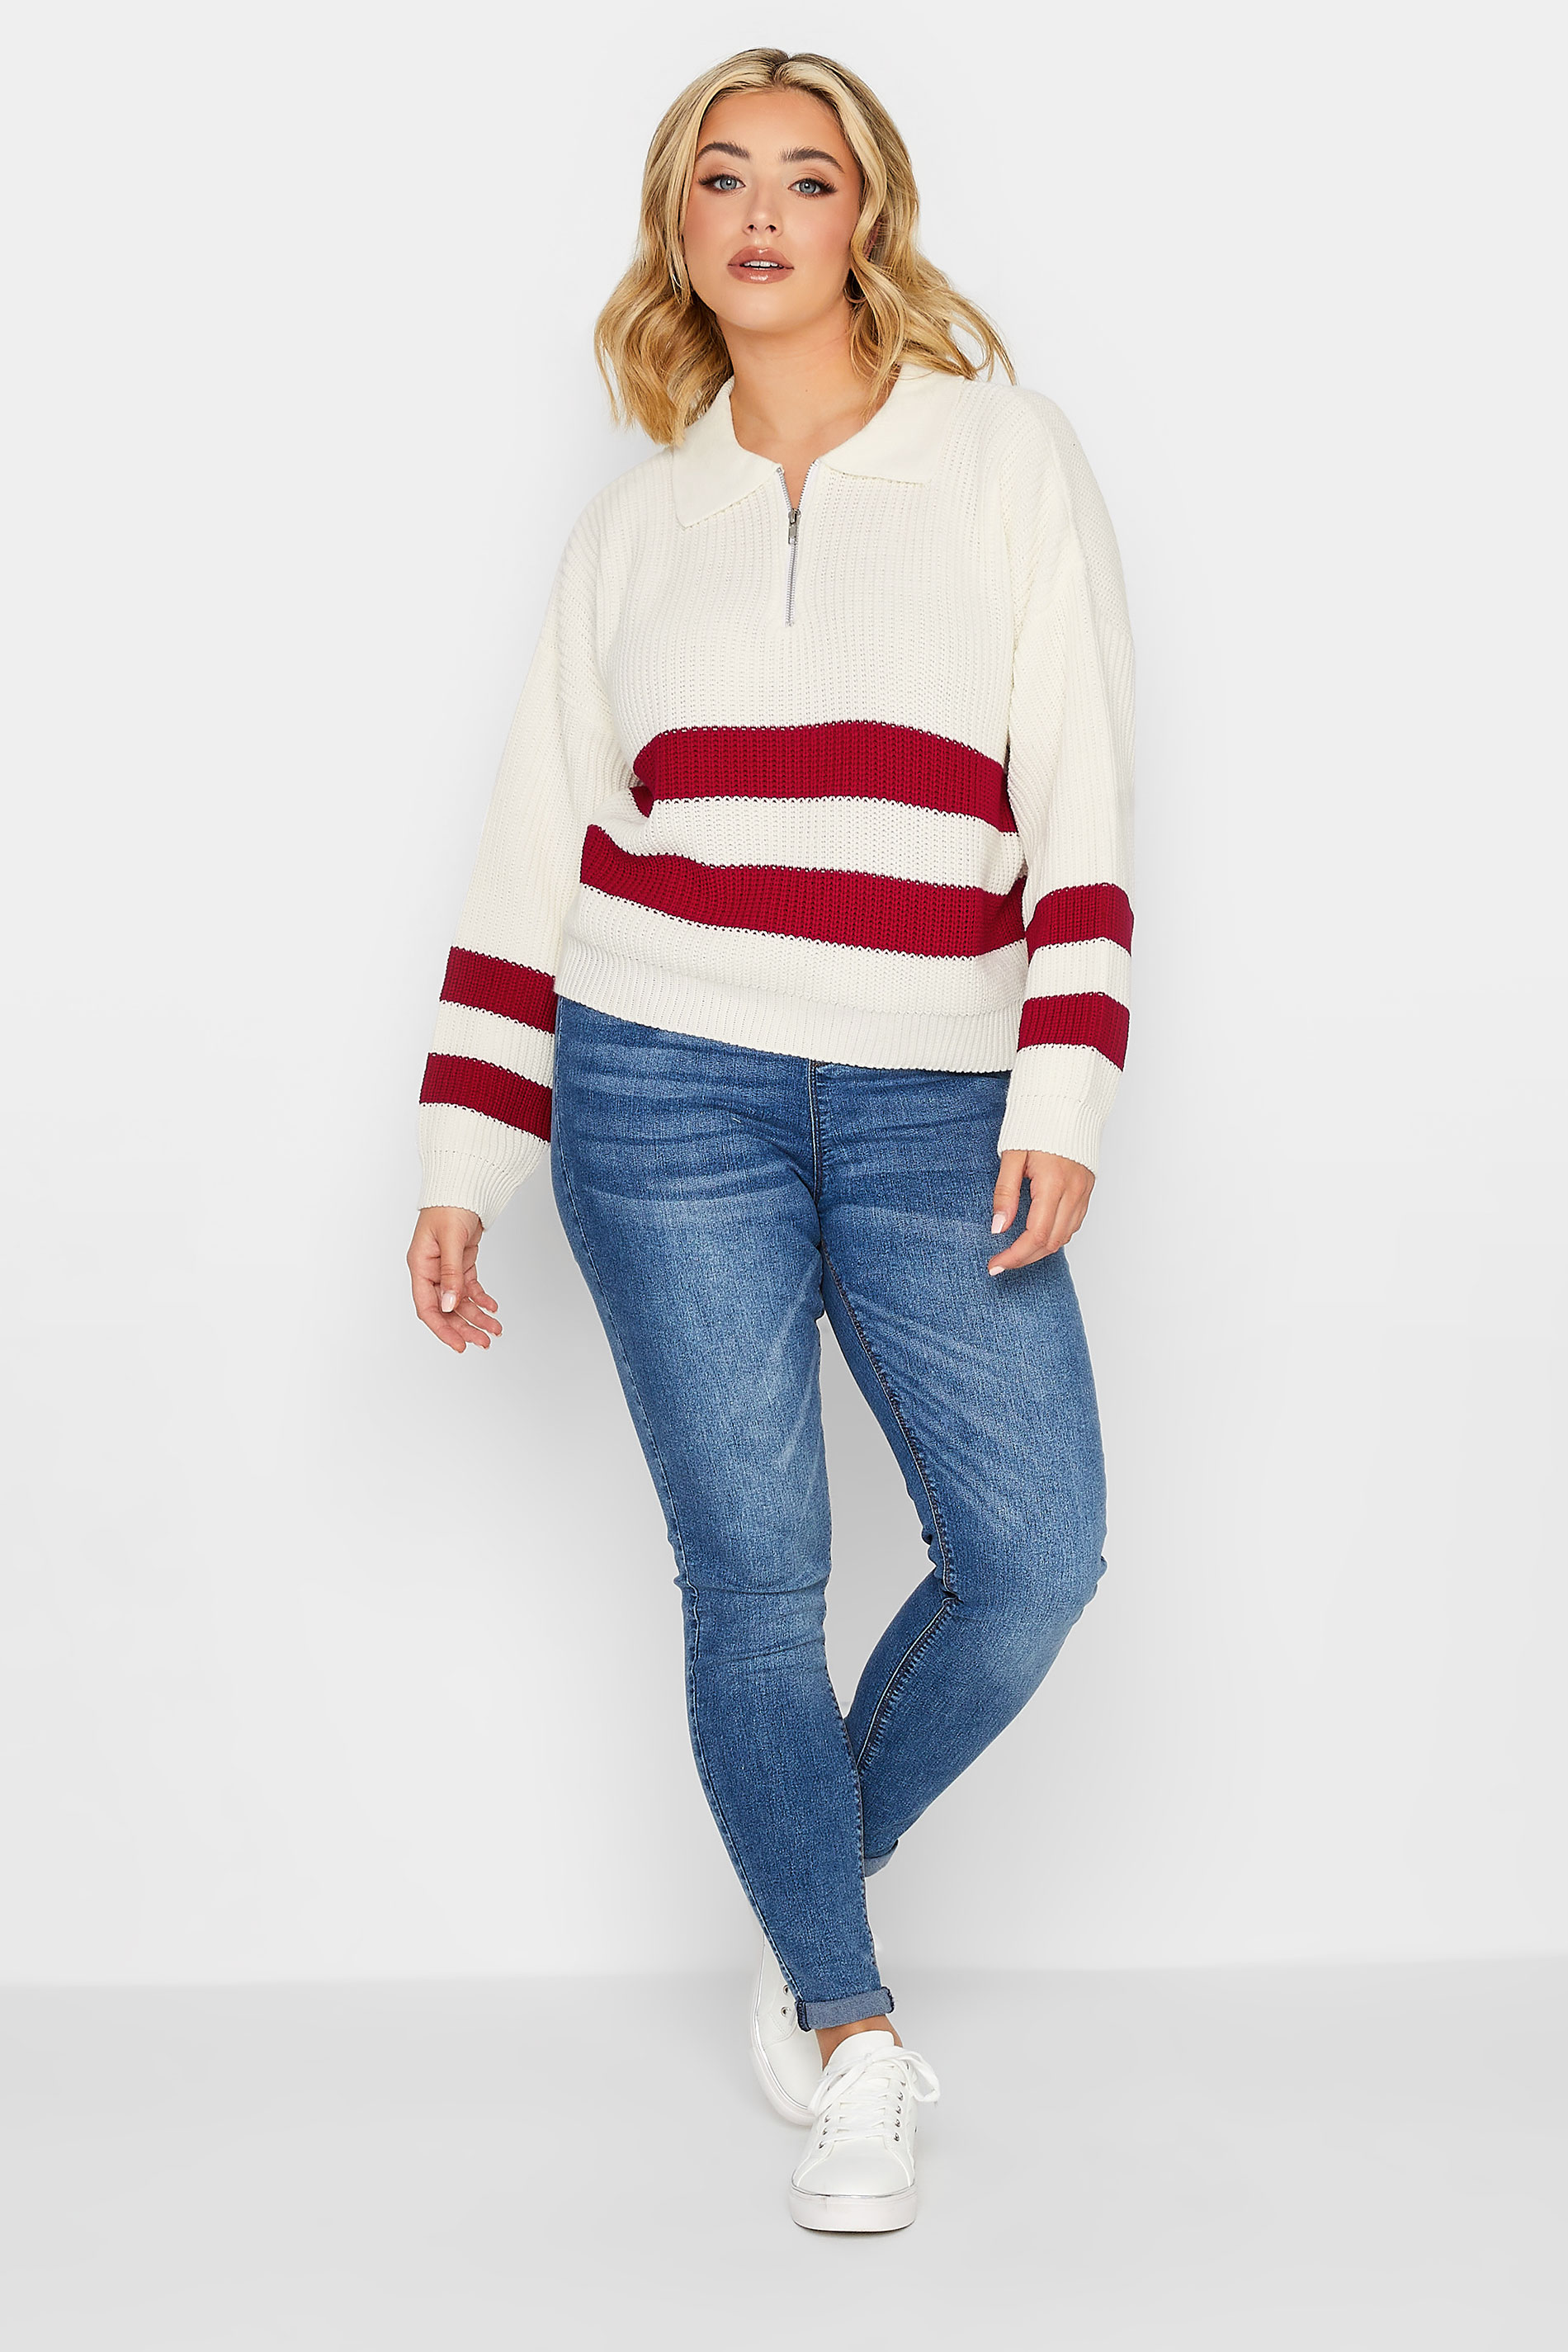 YOURS PETITE Plus Size White & Red Stripe Zip Collar Jumper | Yours Clothing 2